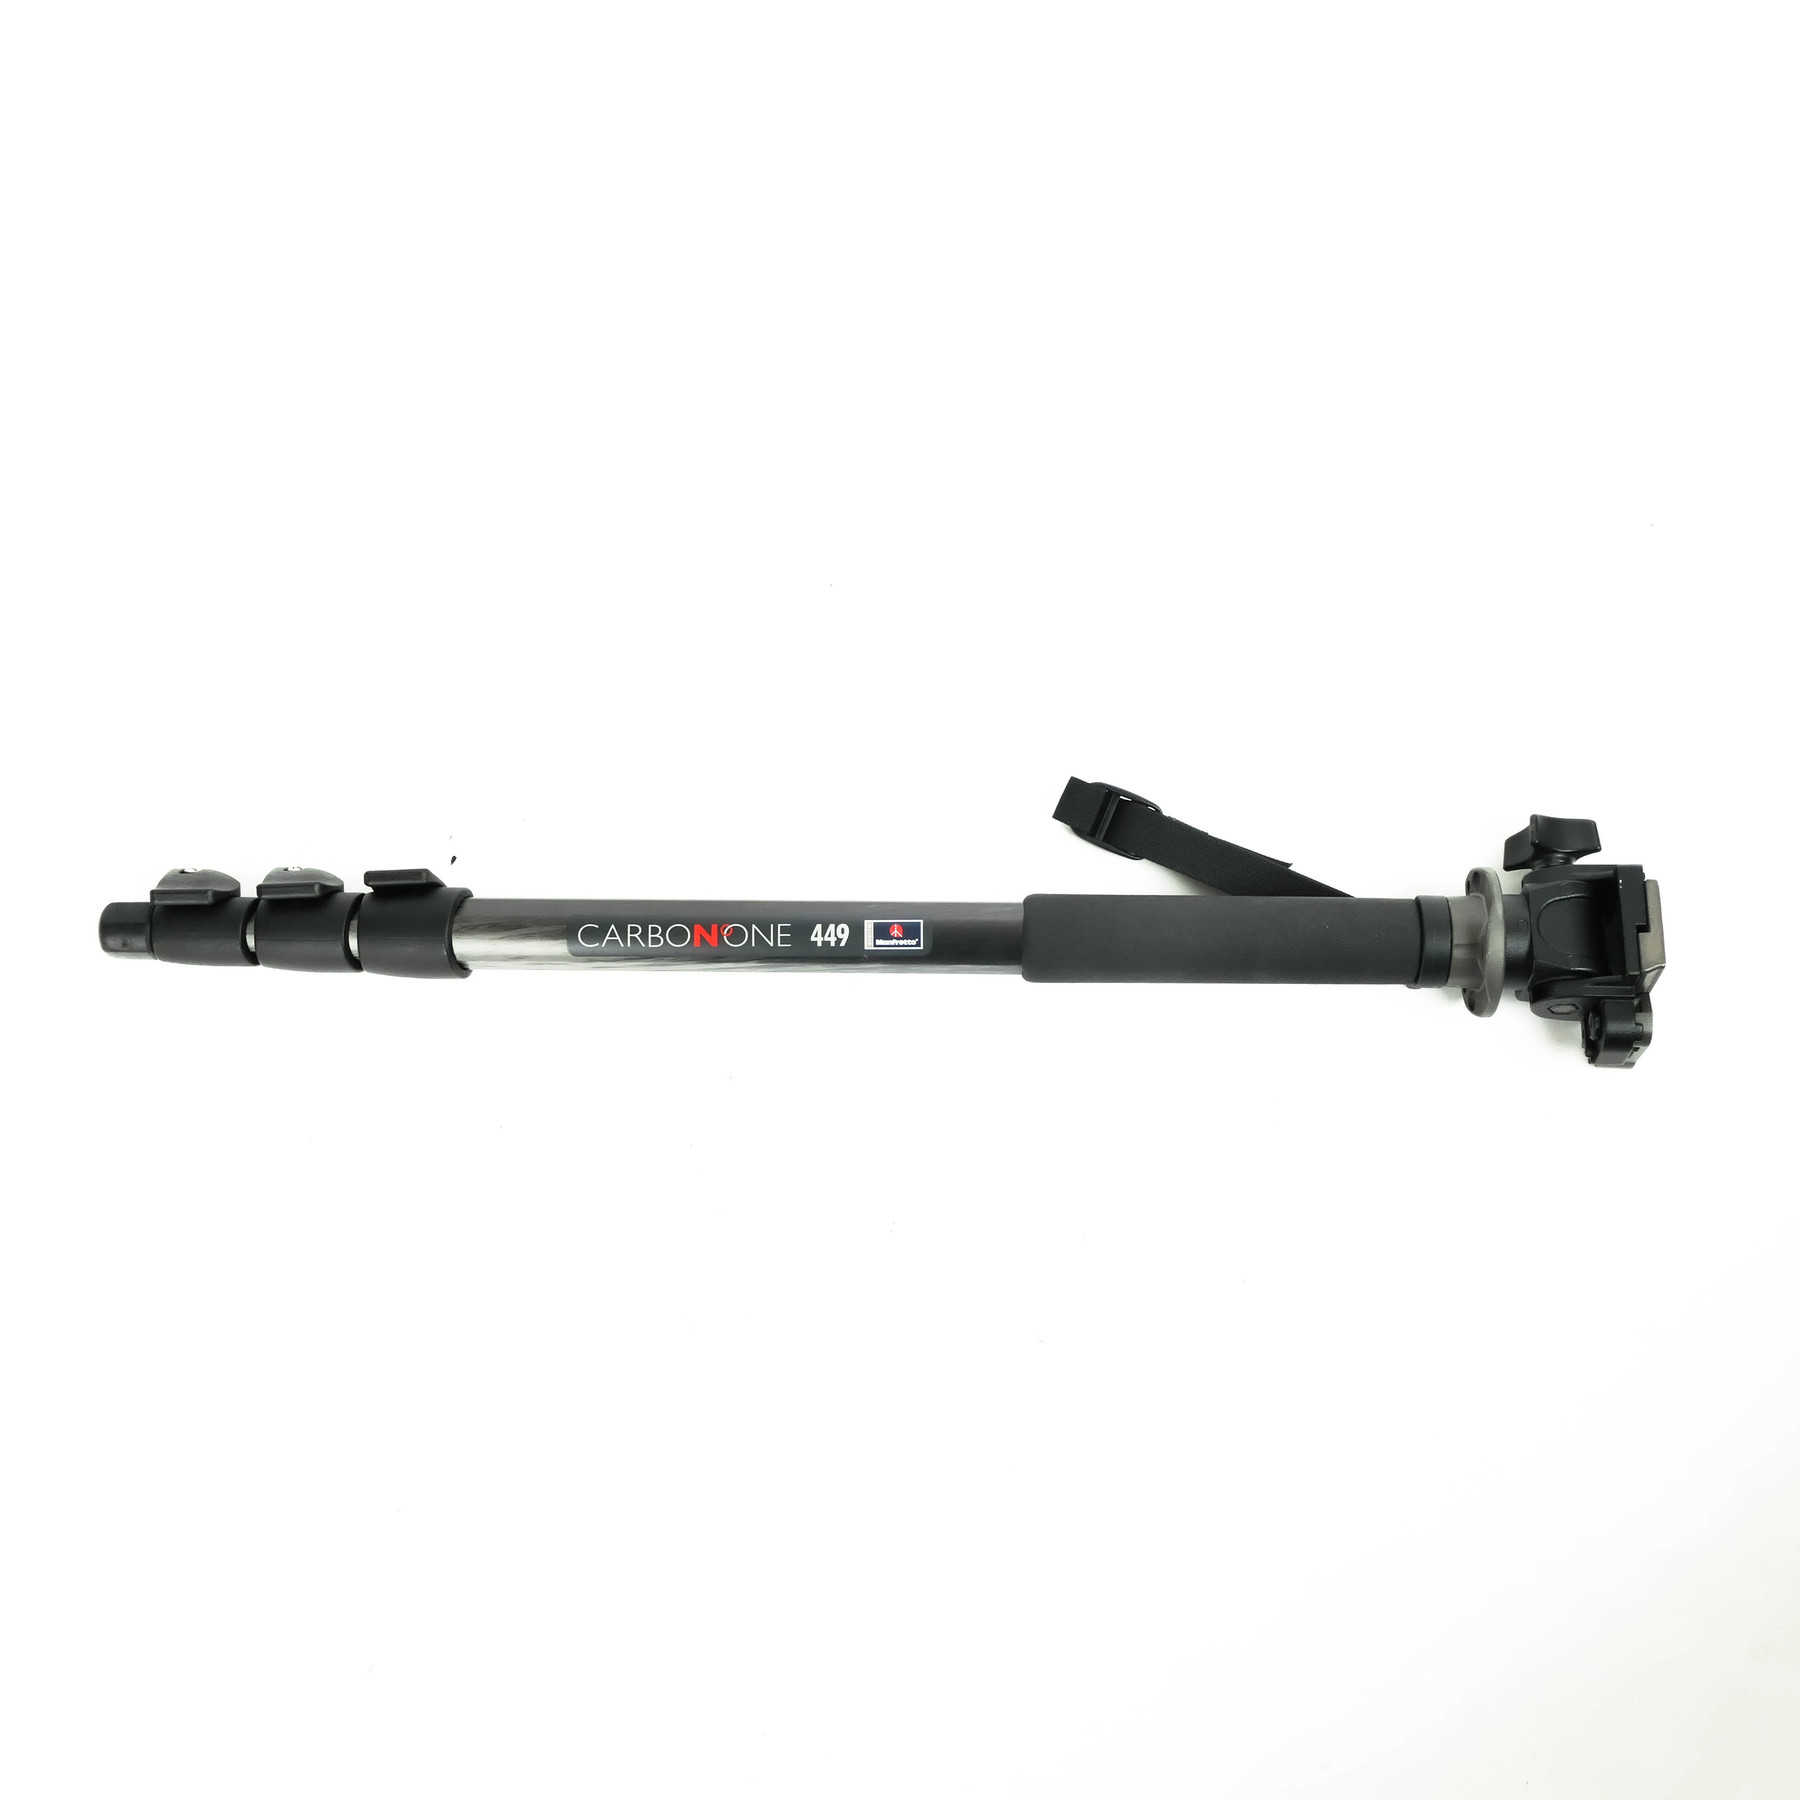 Manfrotto монопод 449 carbon